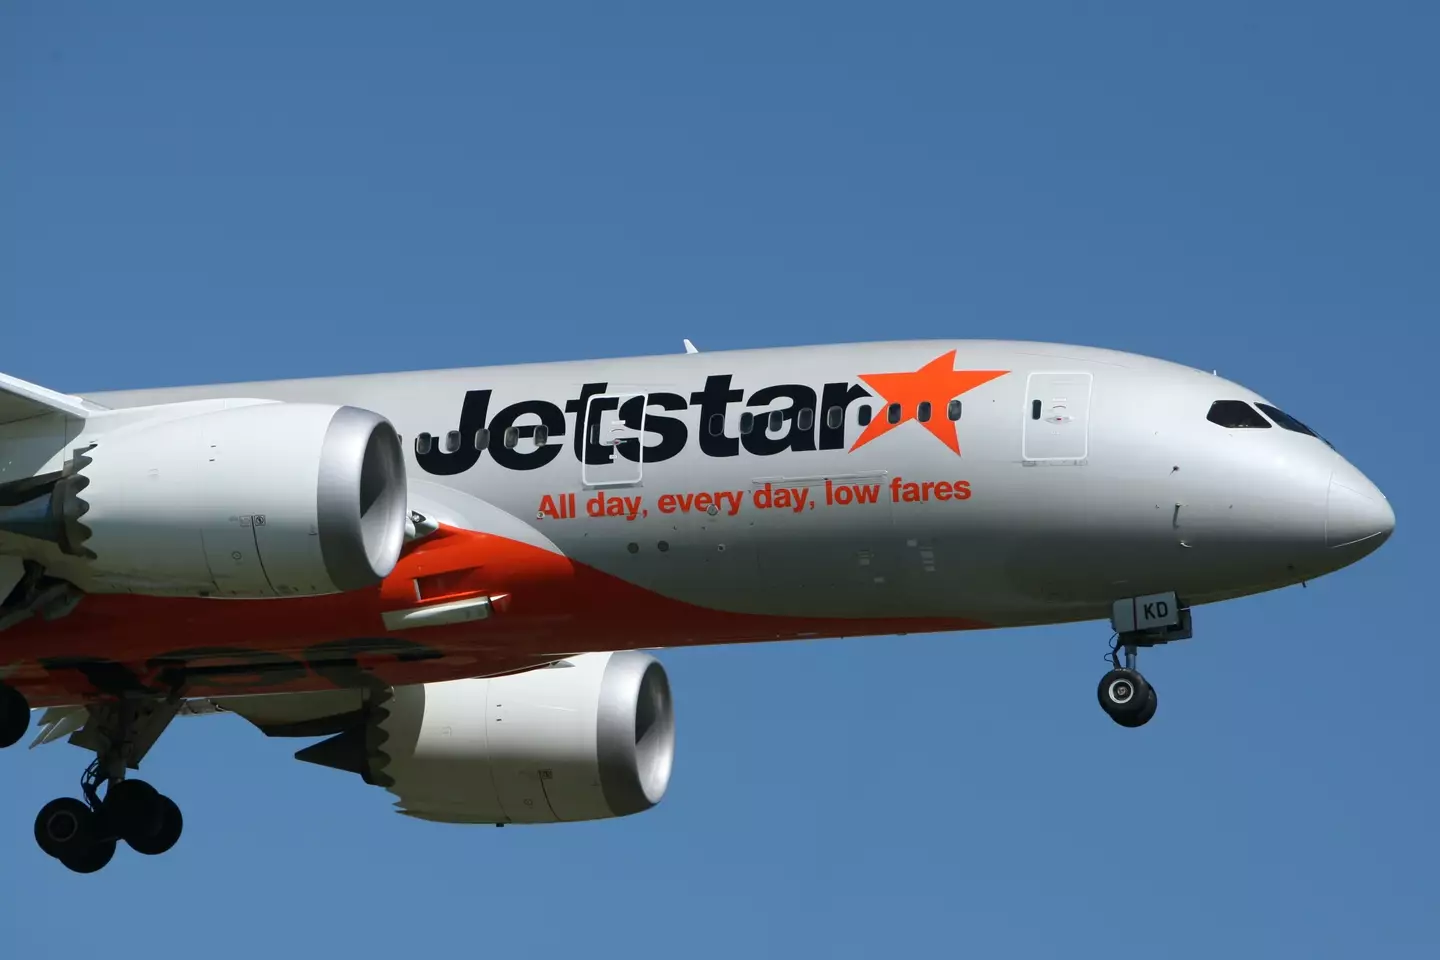 Holly was flying with Jetstar.